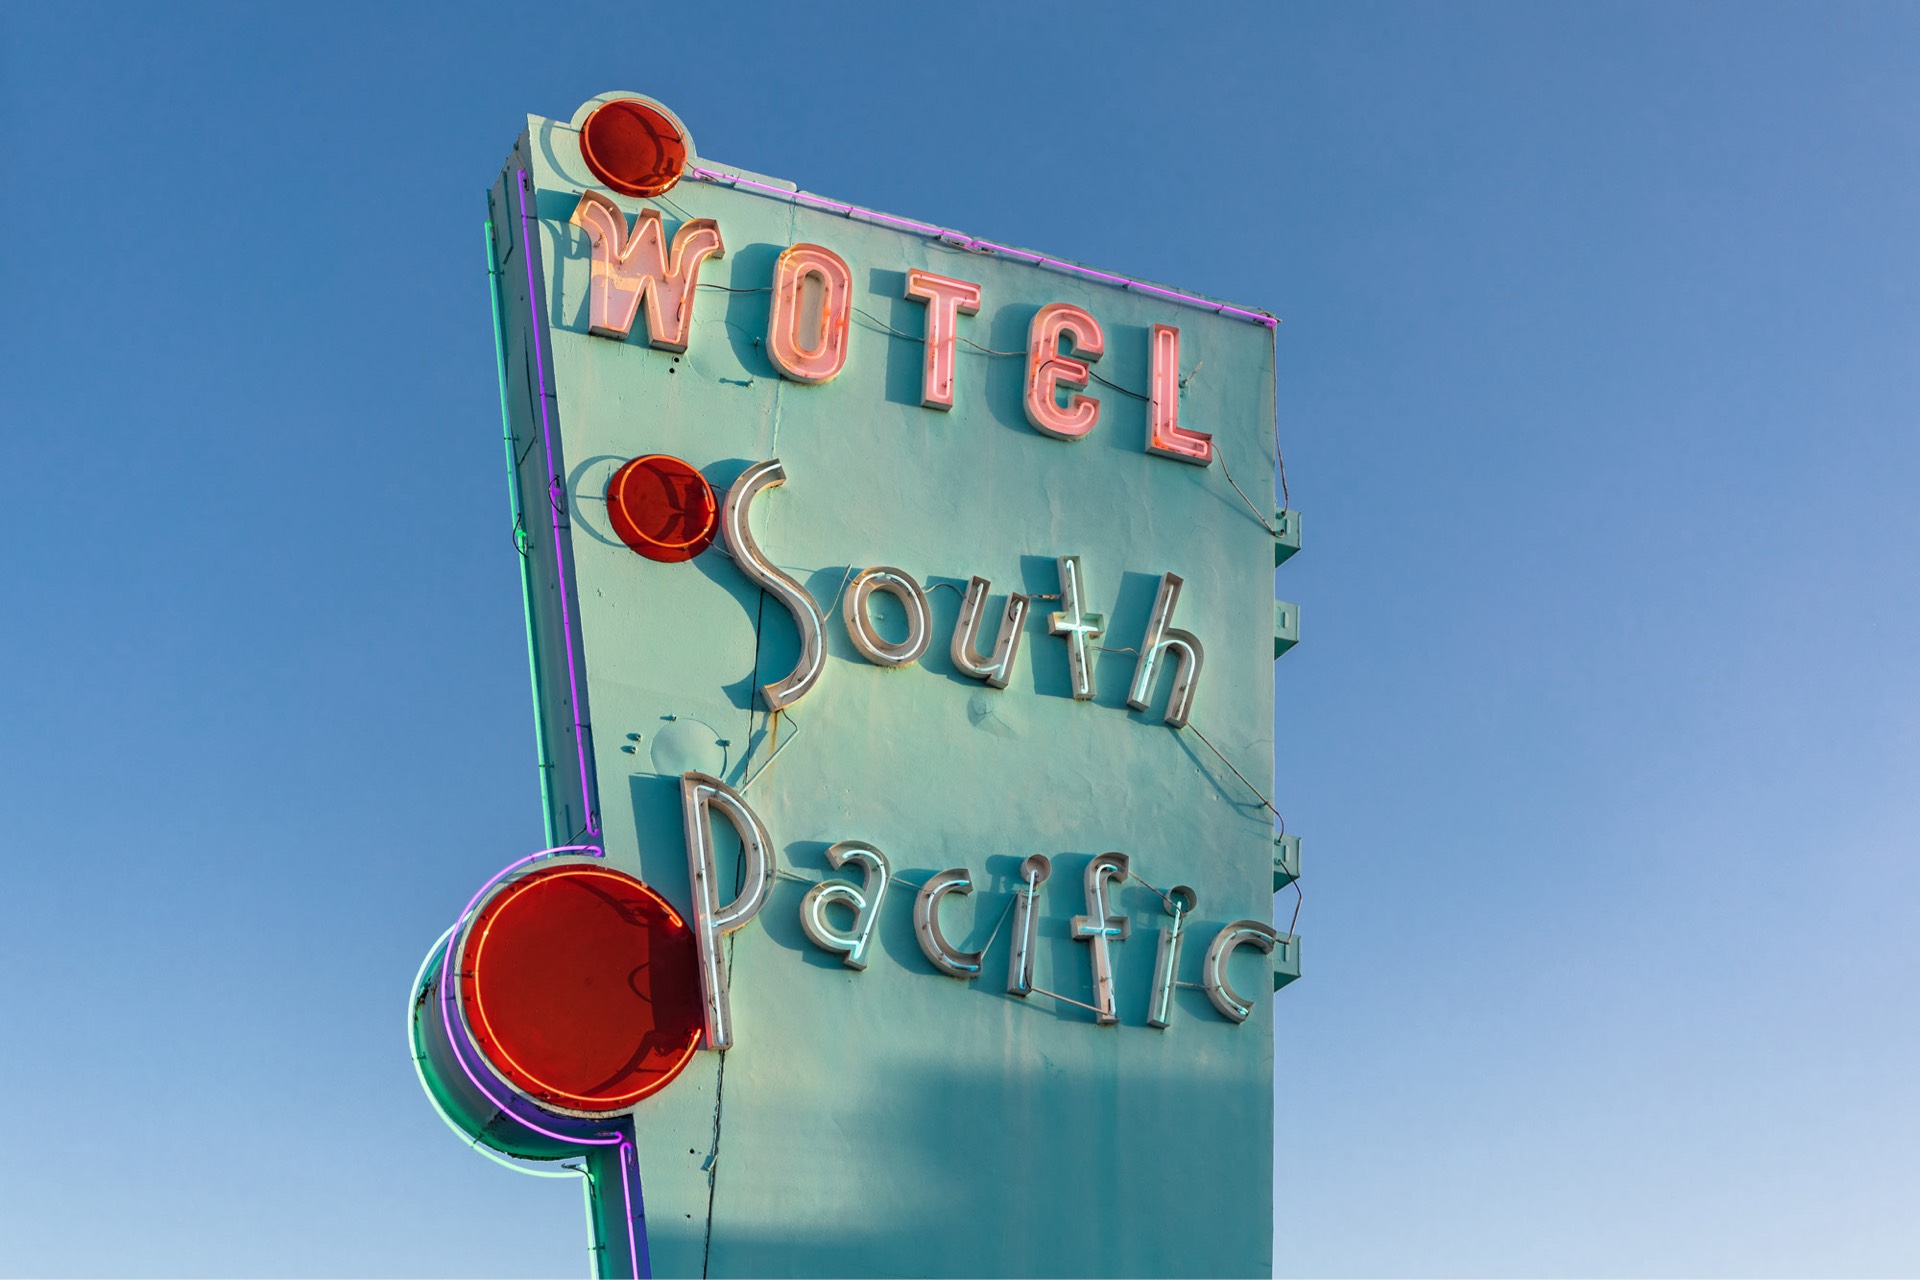 Wotel South Pacific signage